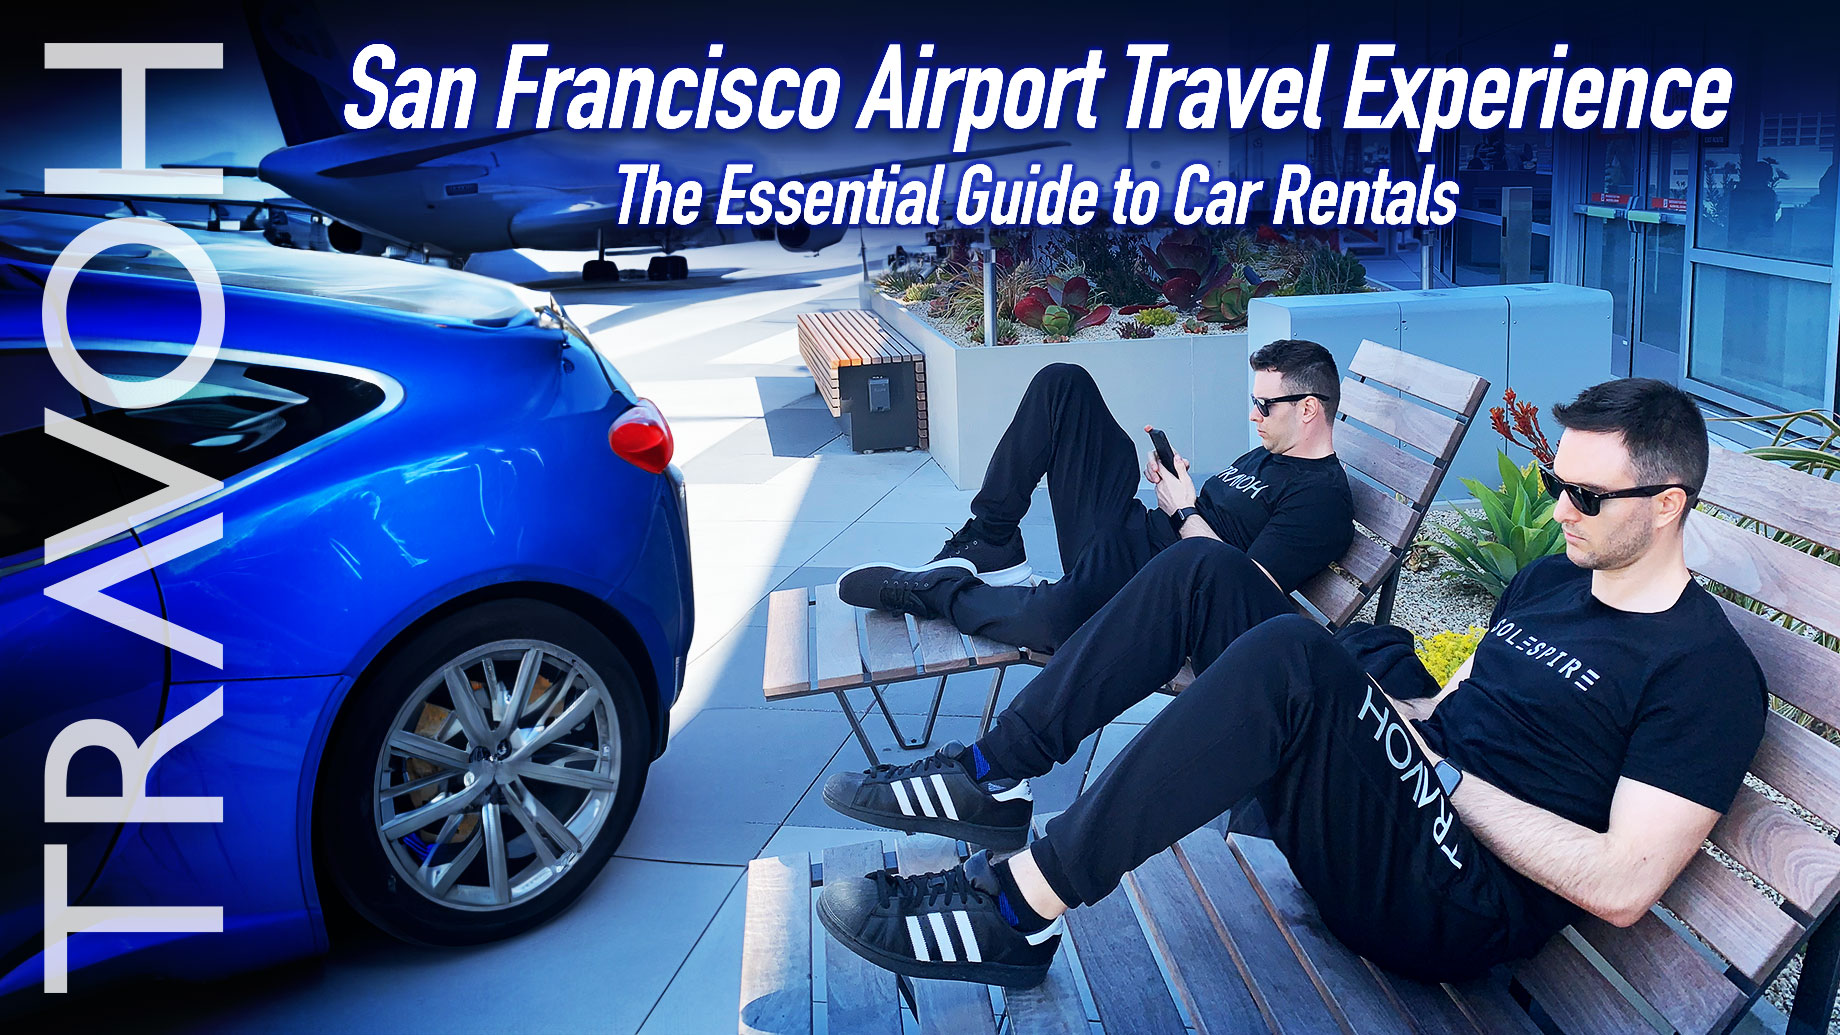 San Francisco Airport Travel Experience: The Essential Guide to Car Rentals – Featuring Marcus Anthony & Derek Alexander